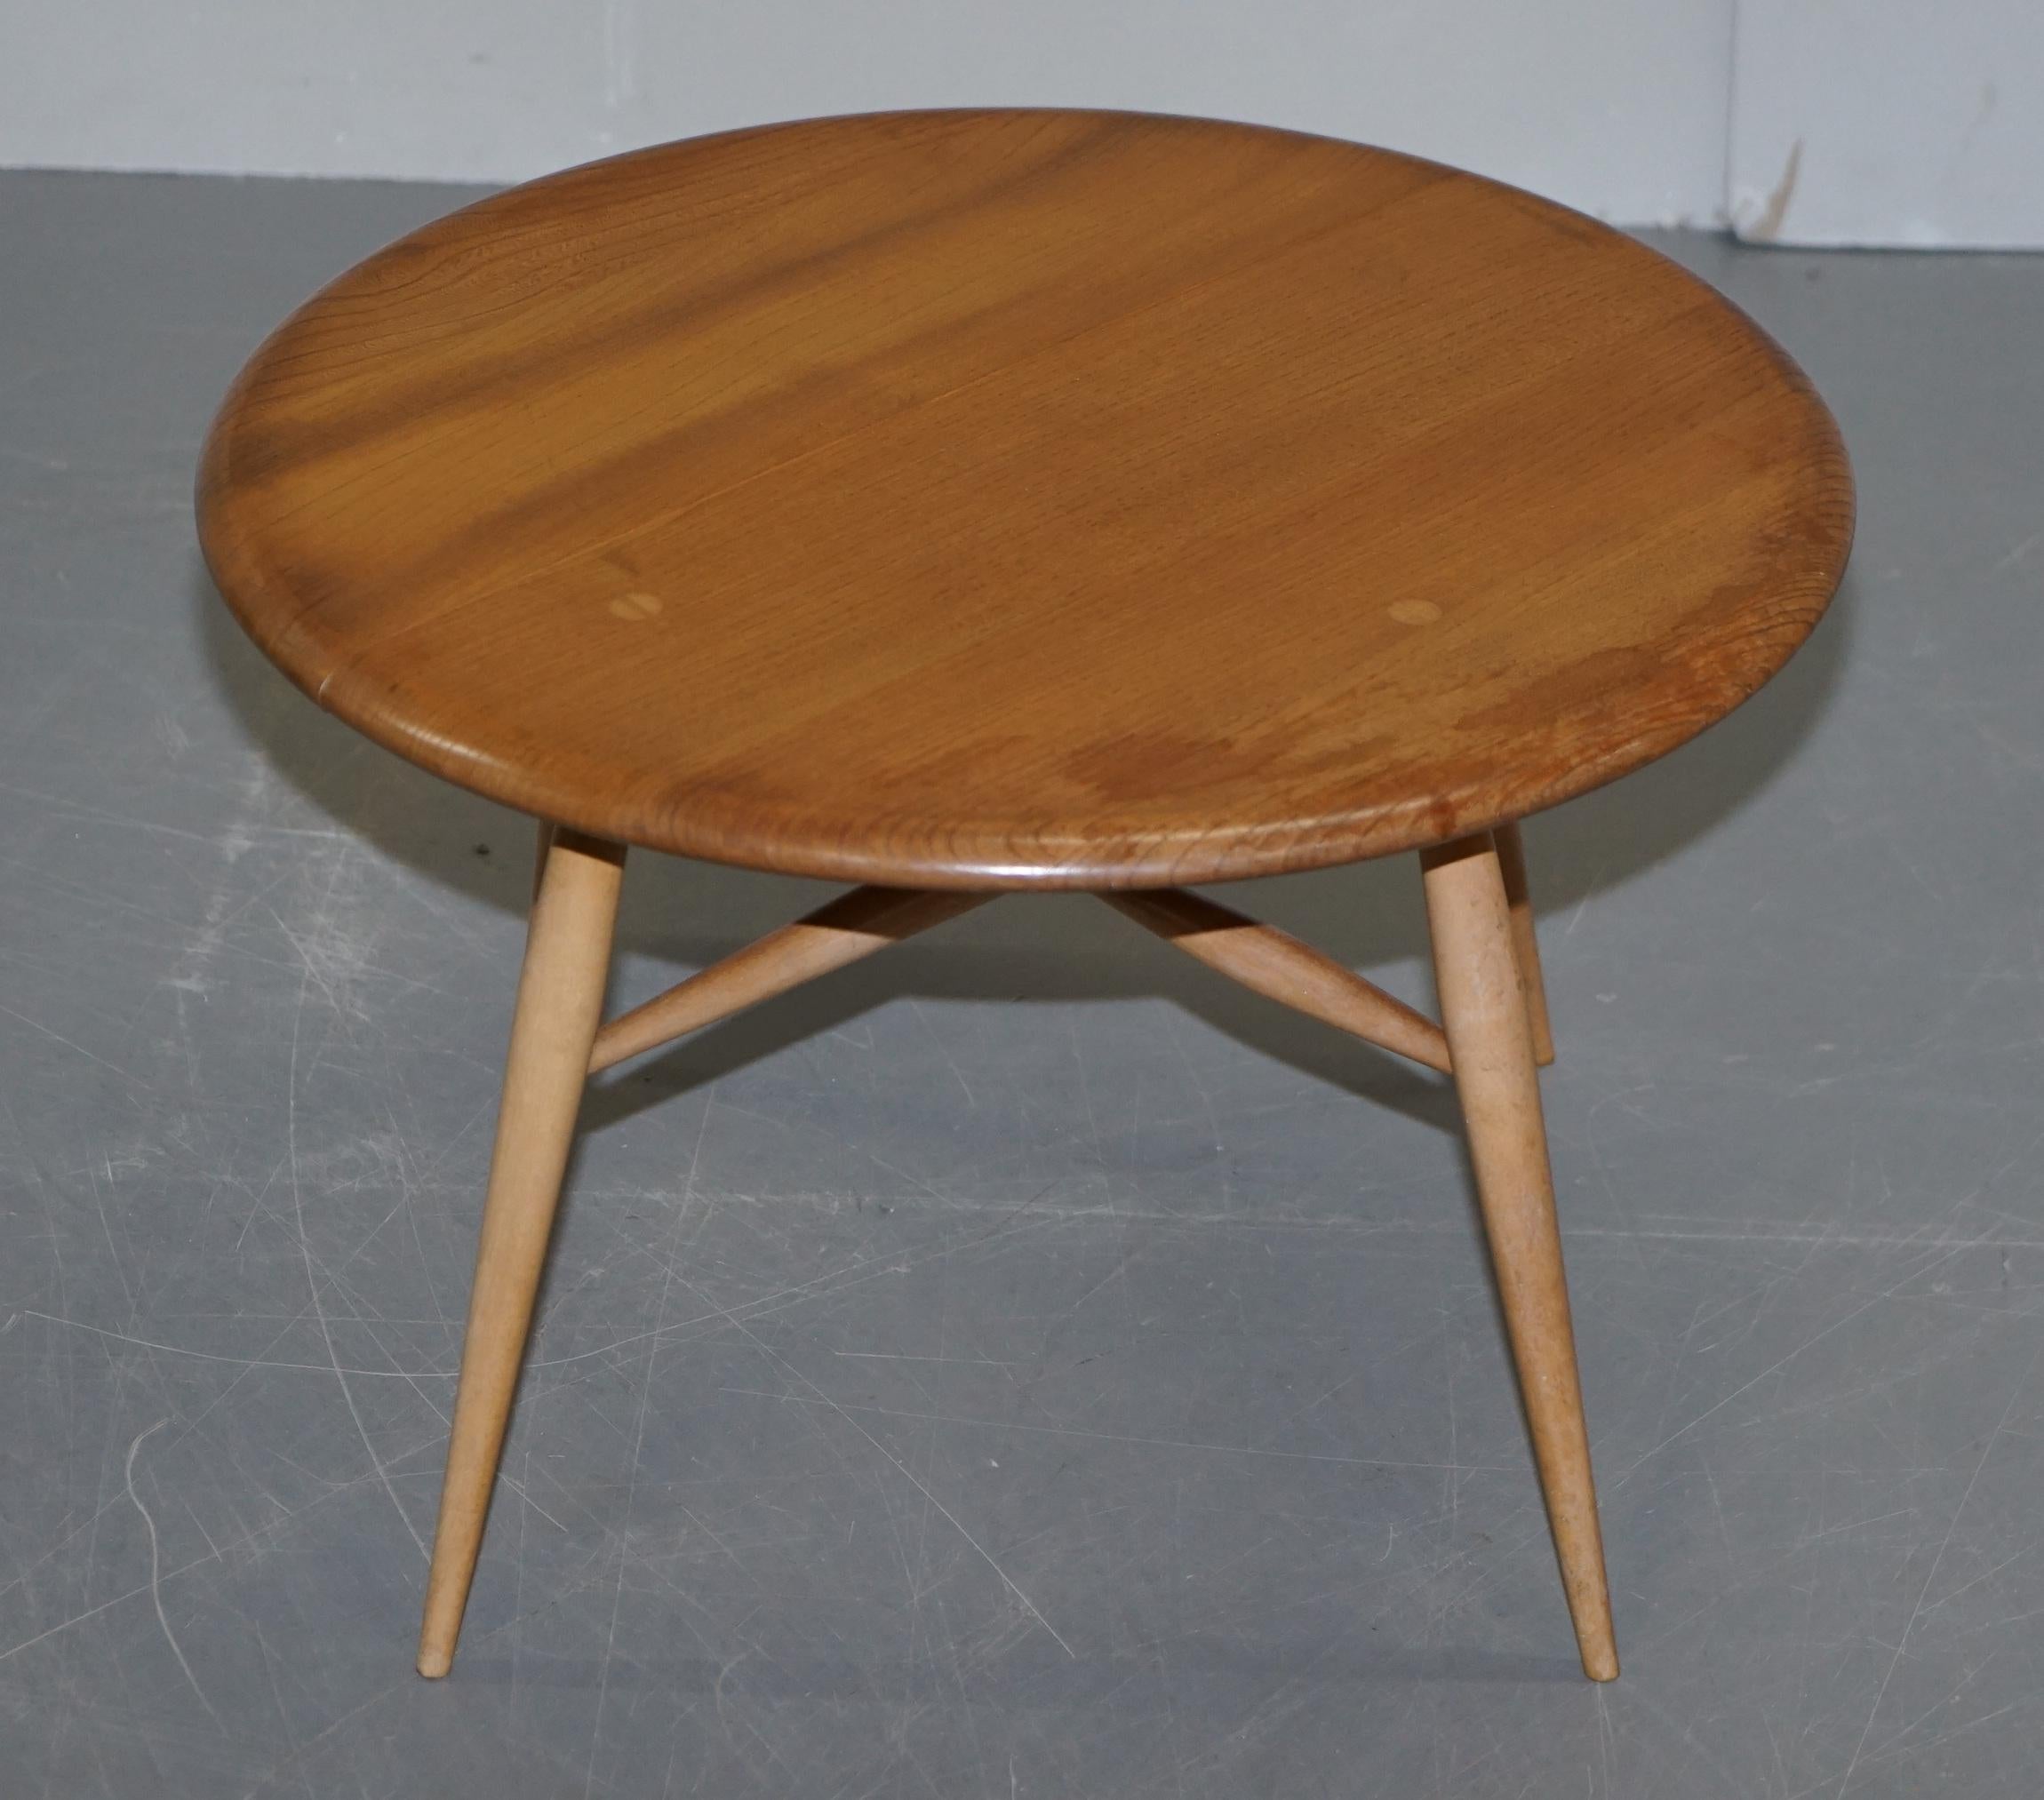 We are delighted to offer for sale this lovely 1960s Ercol G Plan folding side or coffee table in solid elm

This piece is part of a suite of Ercol furniture I have recently purchased, I have the wardrobe, mirror top drawers or dressing table and